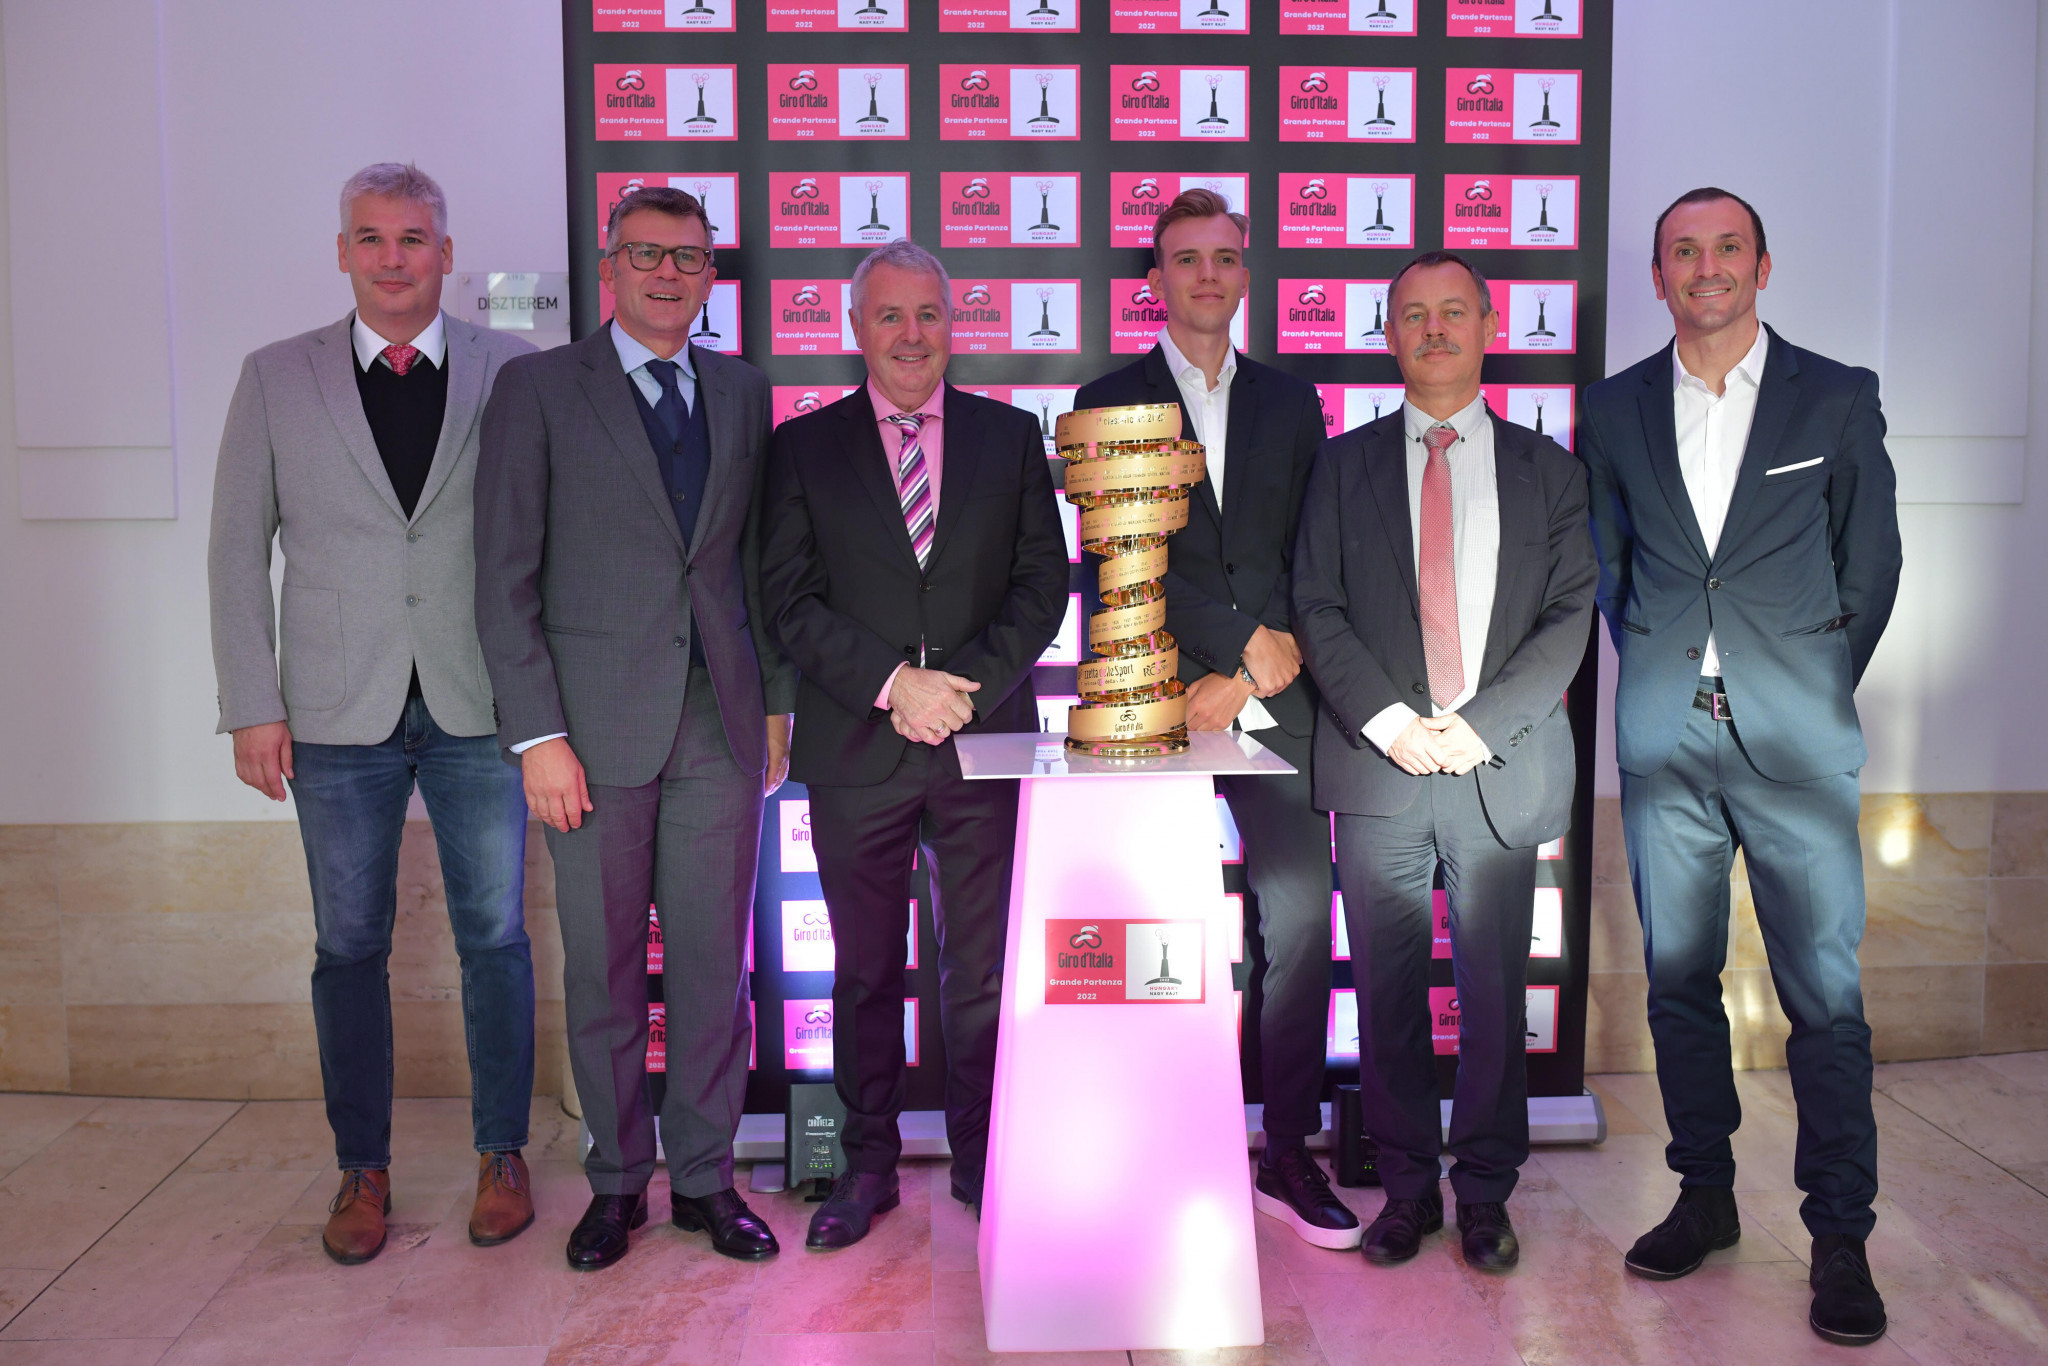 Organisers revealed the three Hungarian stages in Budapest ©Giro d'Italia